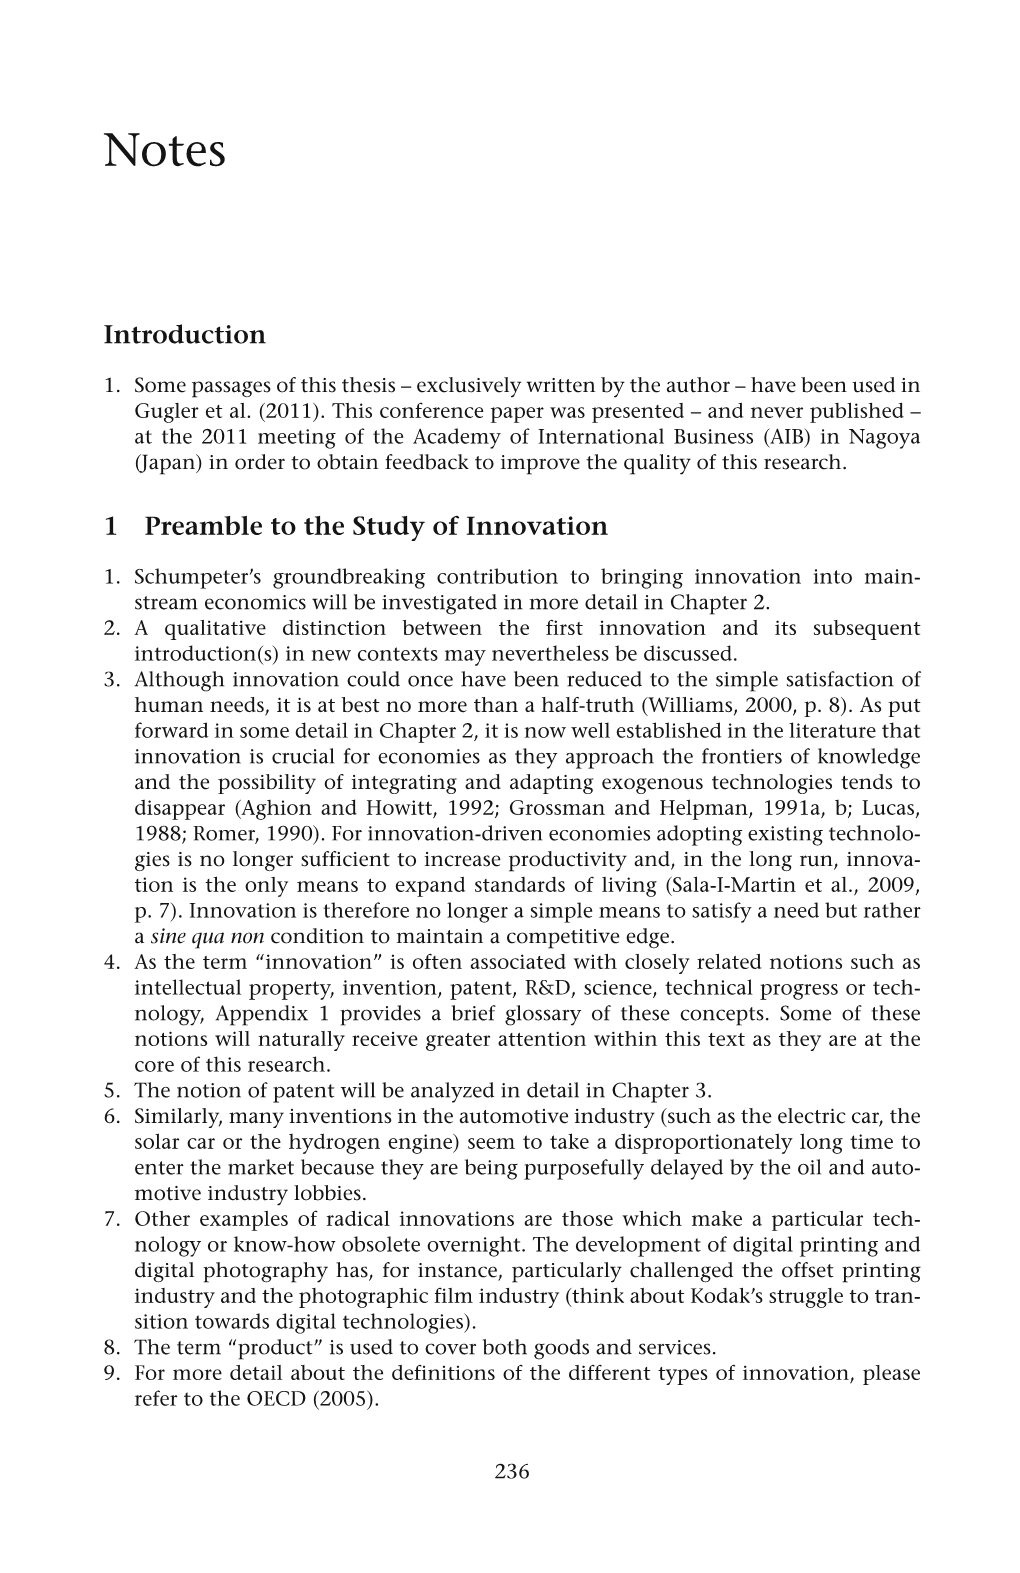 Introduction 1 Preamble to the Study of Innovation